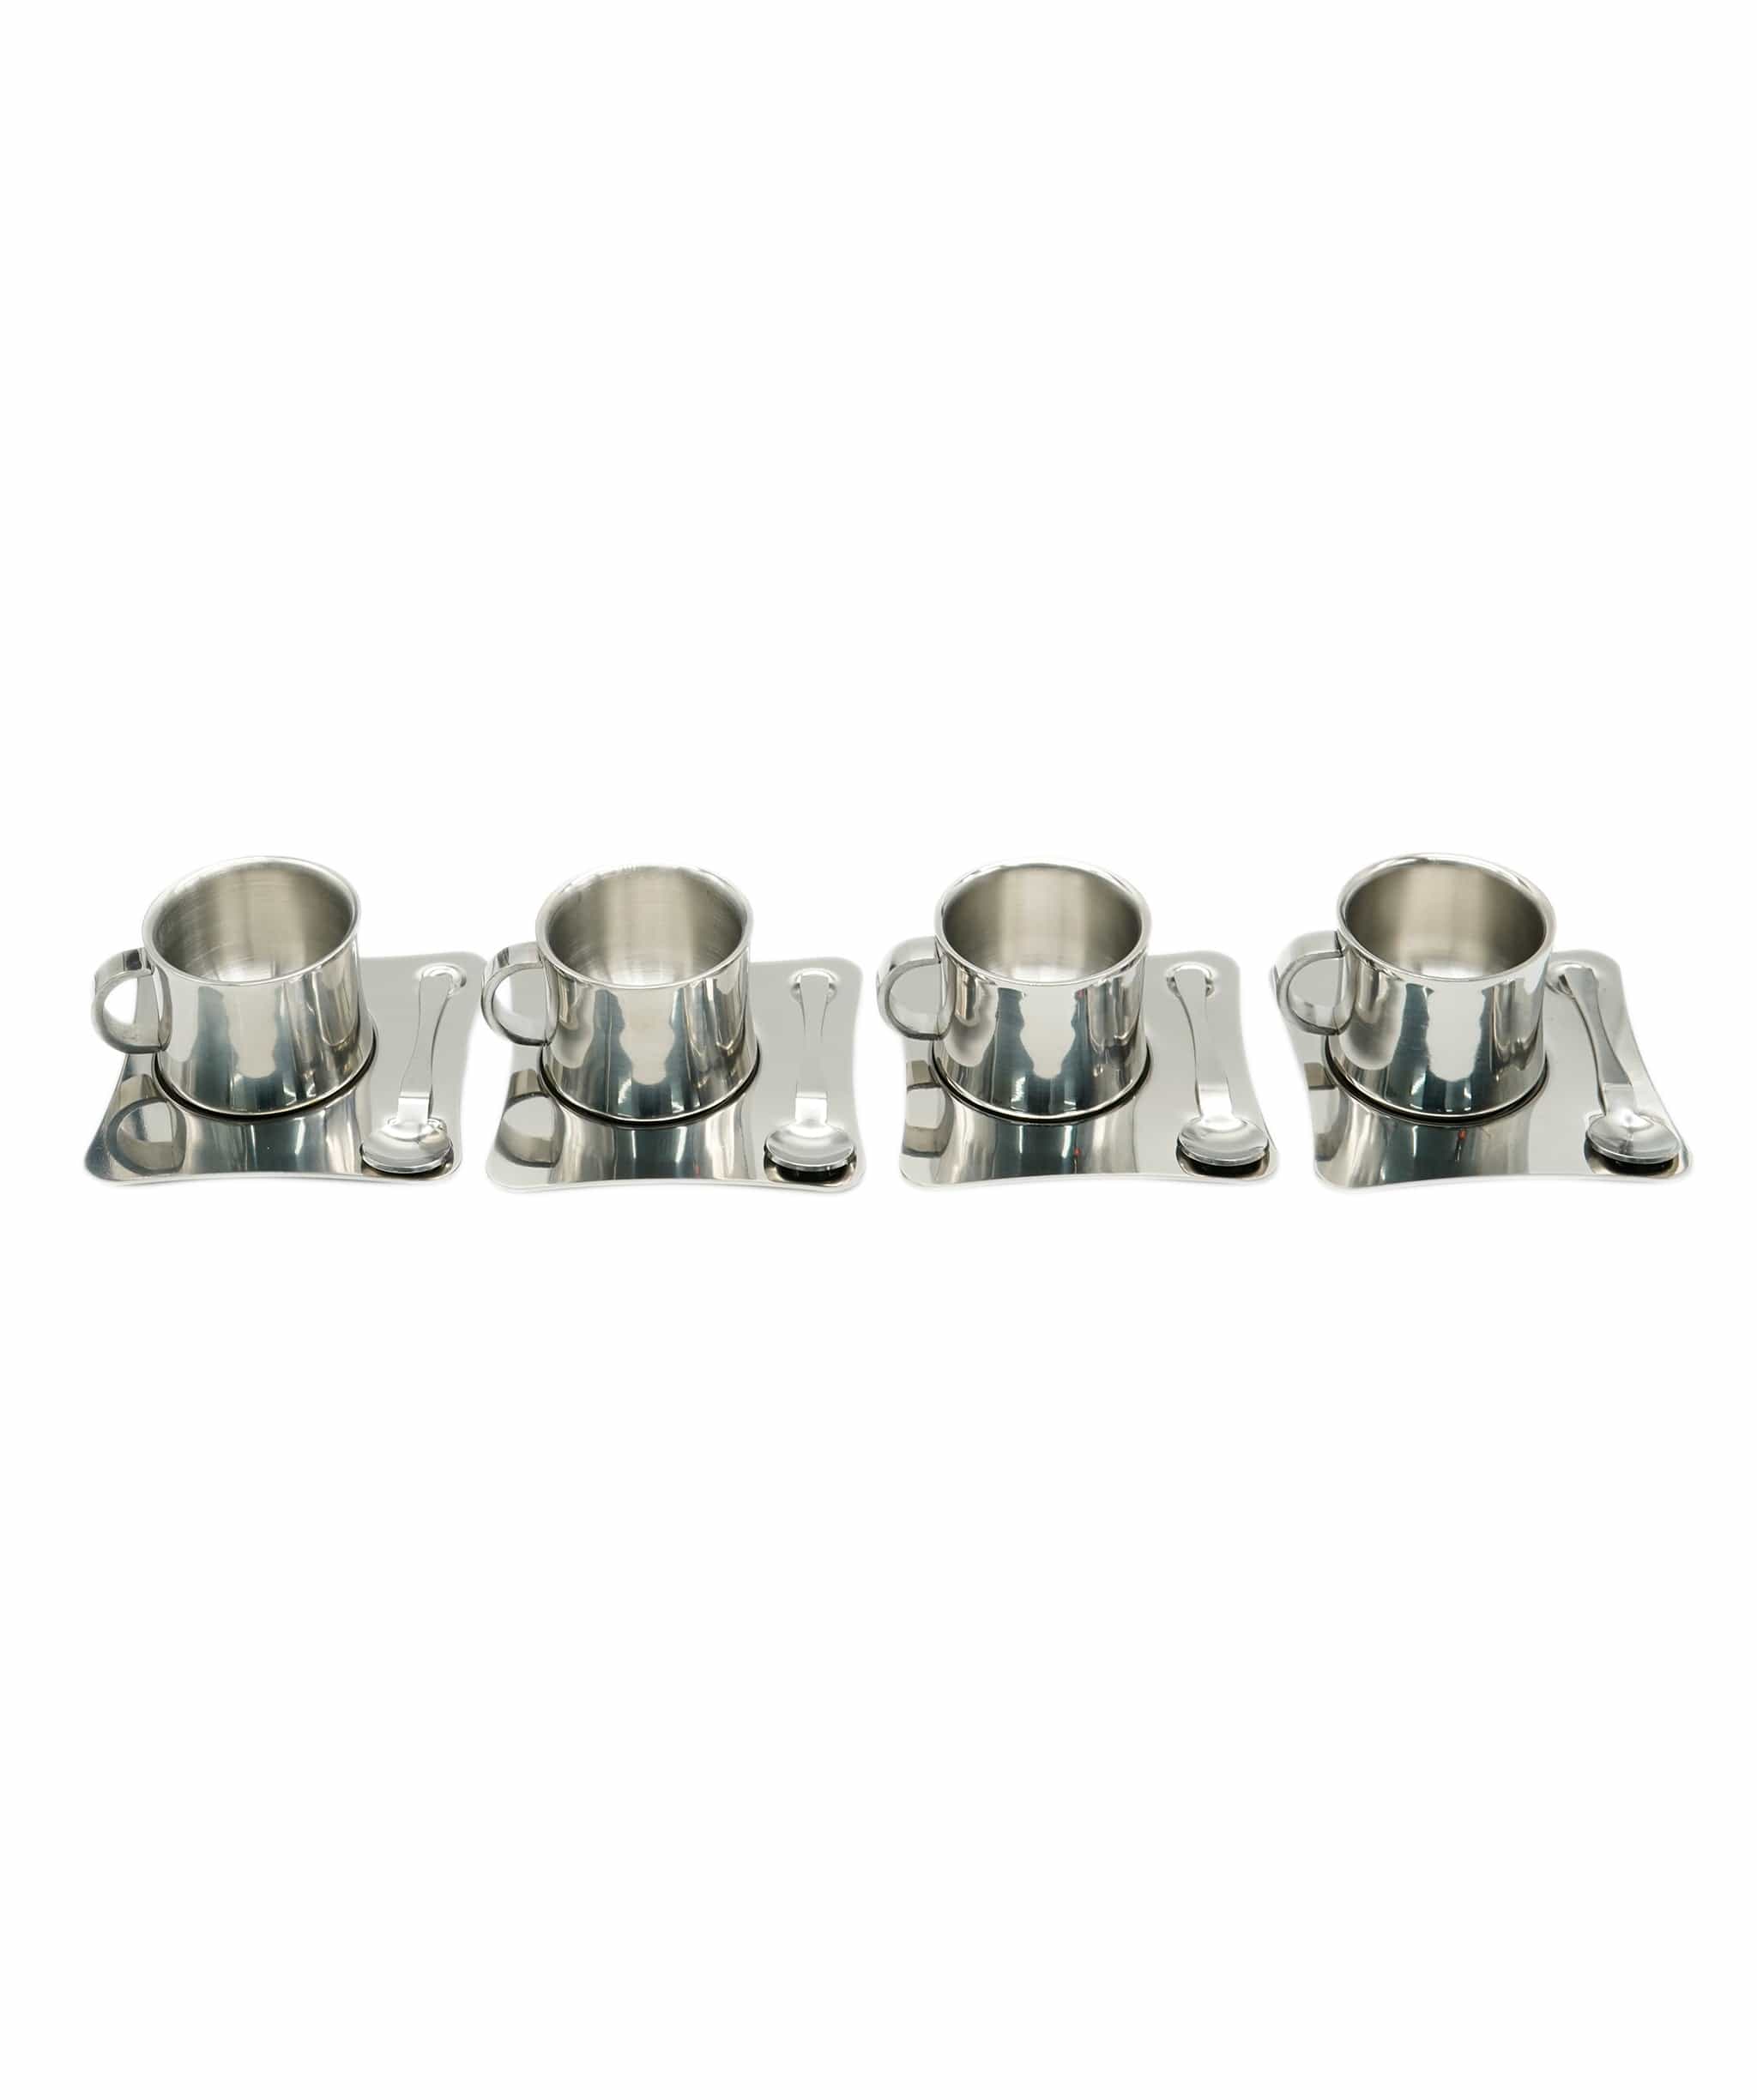 Luxury Promise Espresso Cups with Saucers & Spoons (Set of 4) ASL9275